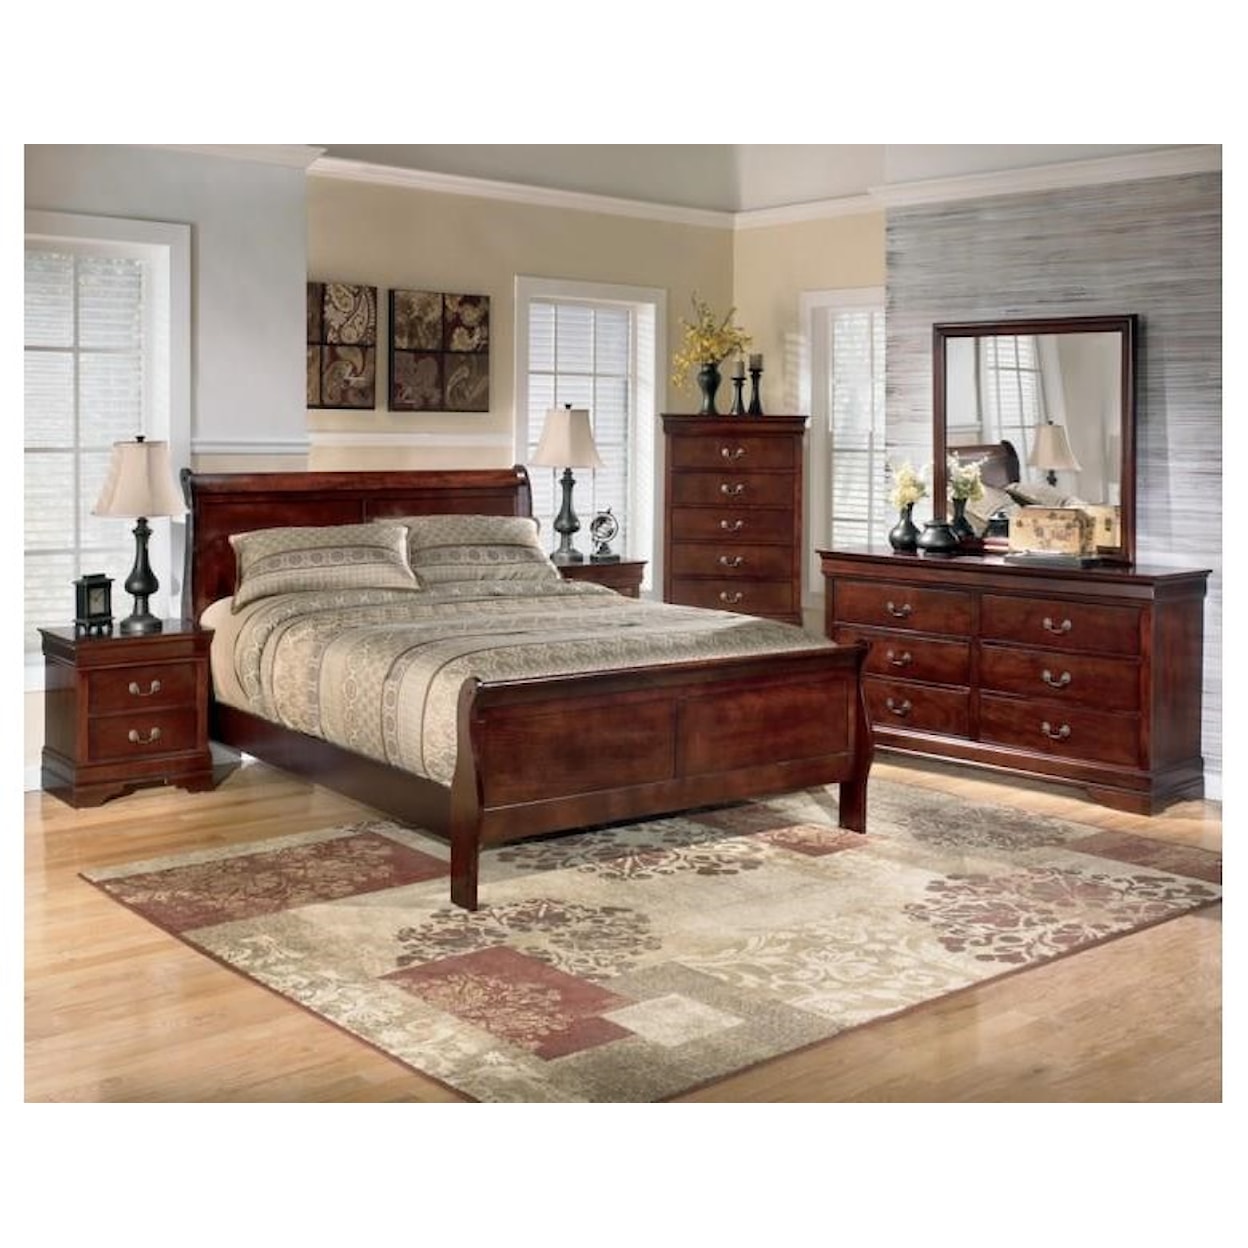 Signature Design by Ashley Alisdair 5PC King Bedroom Group